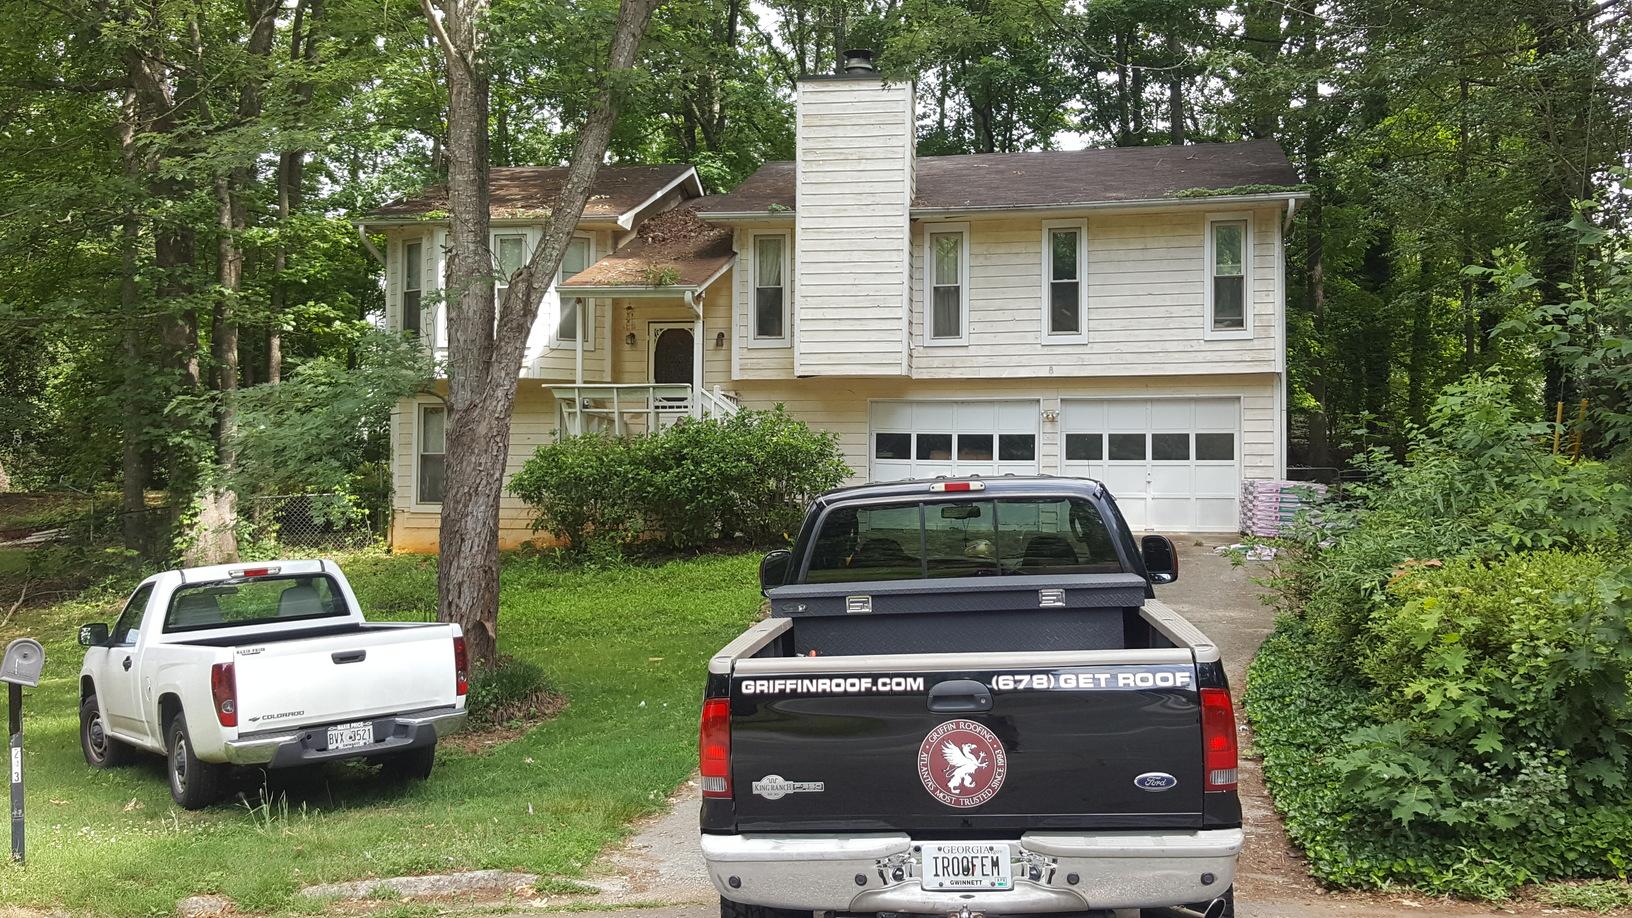 New roof and gutter replacement in Lawrenceville, GA